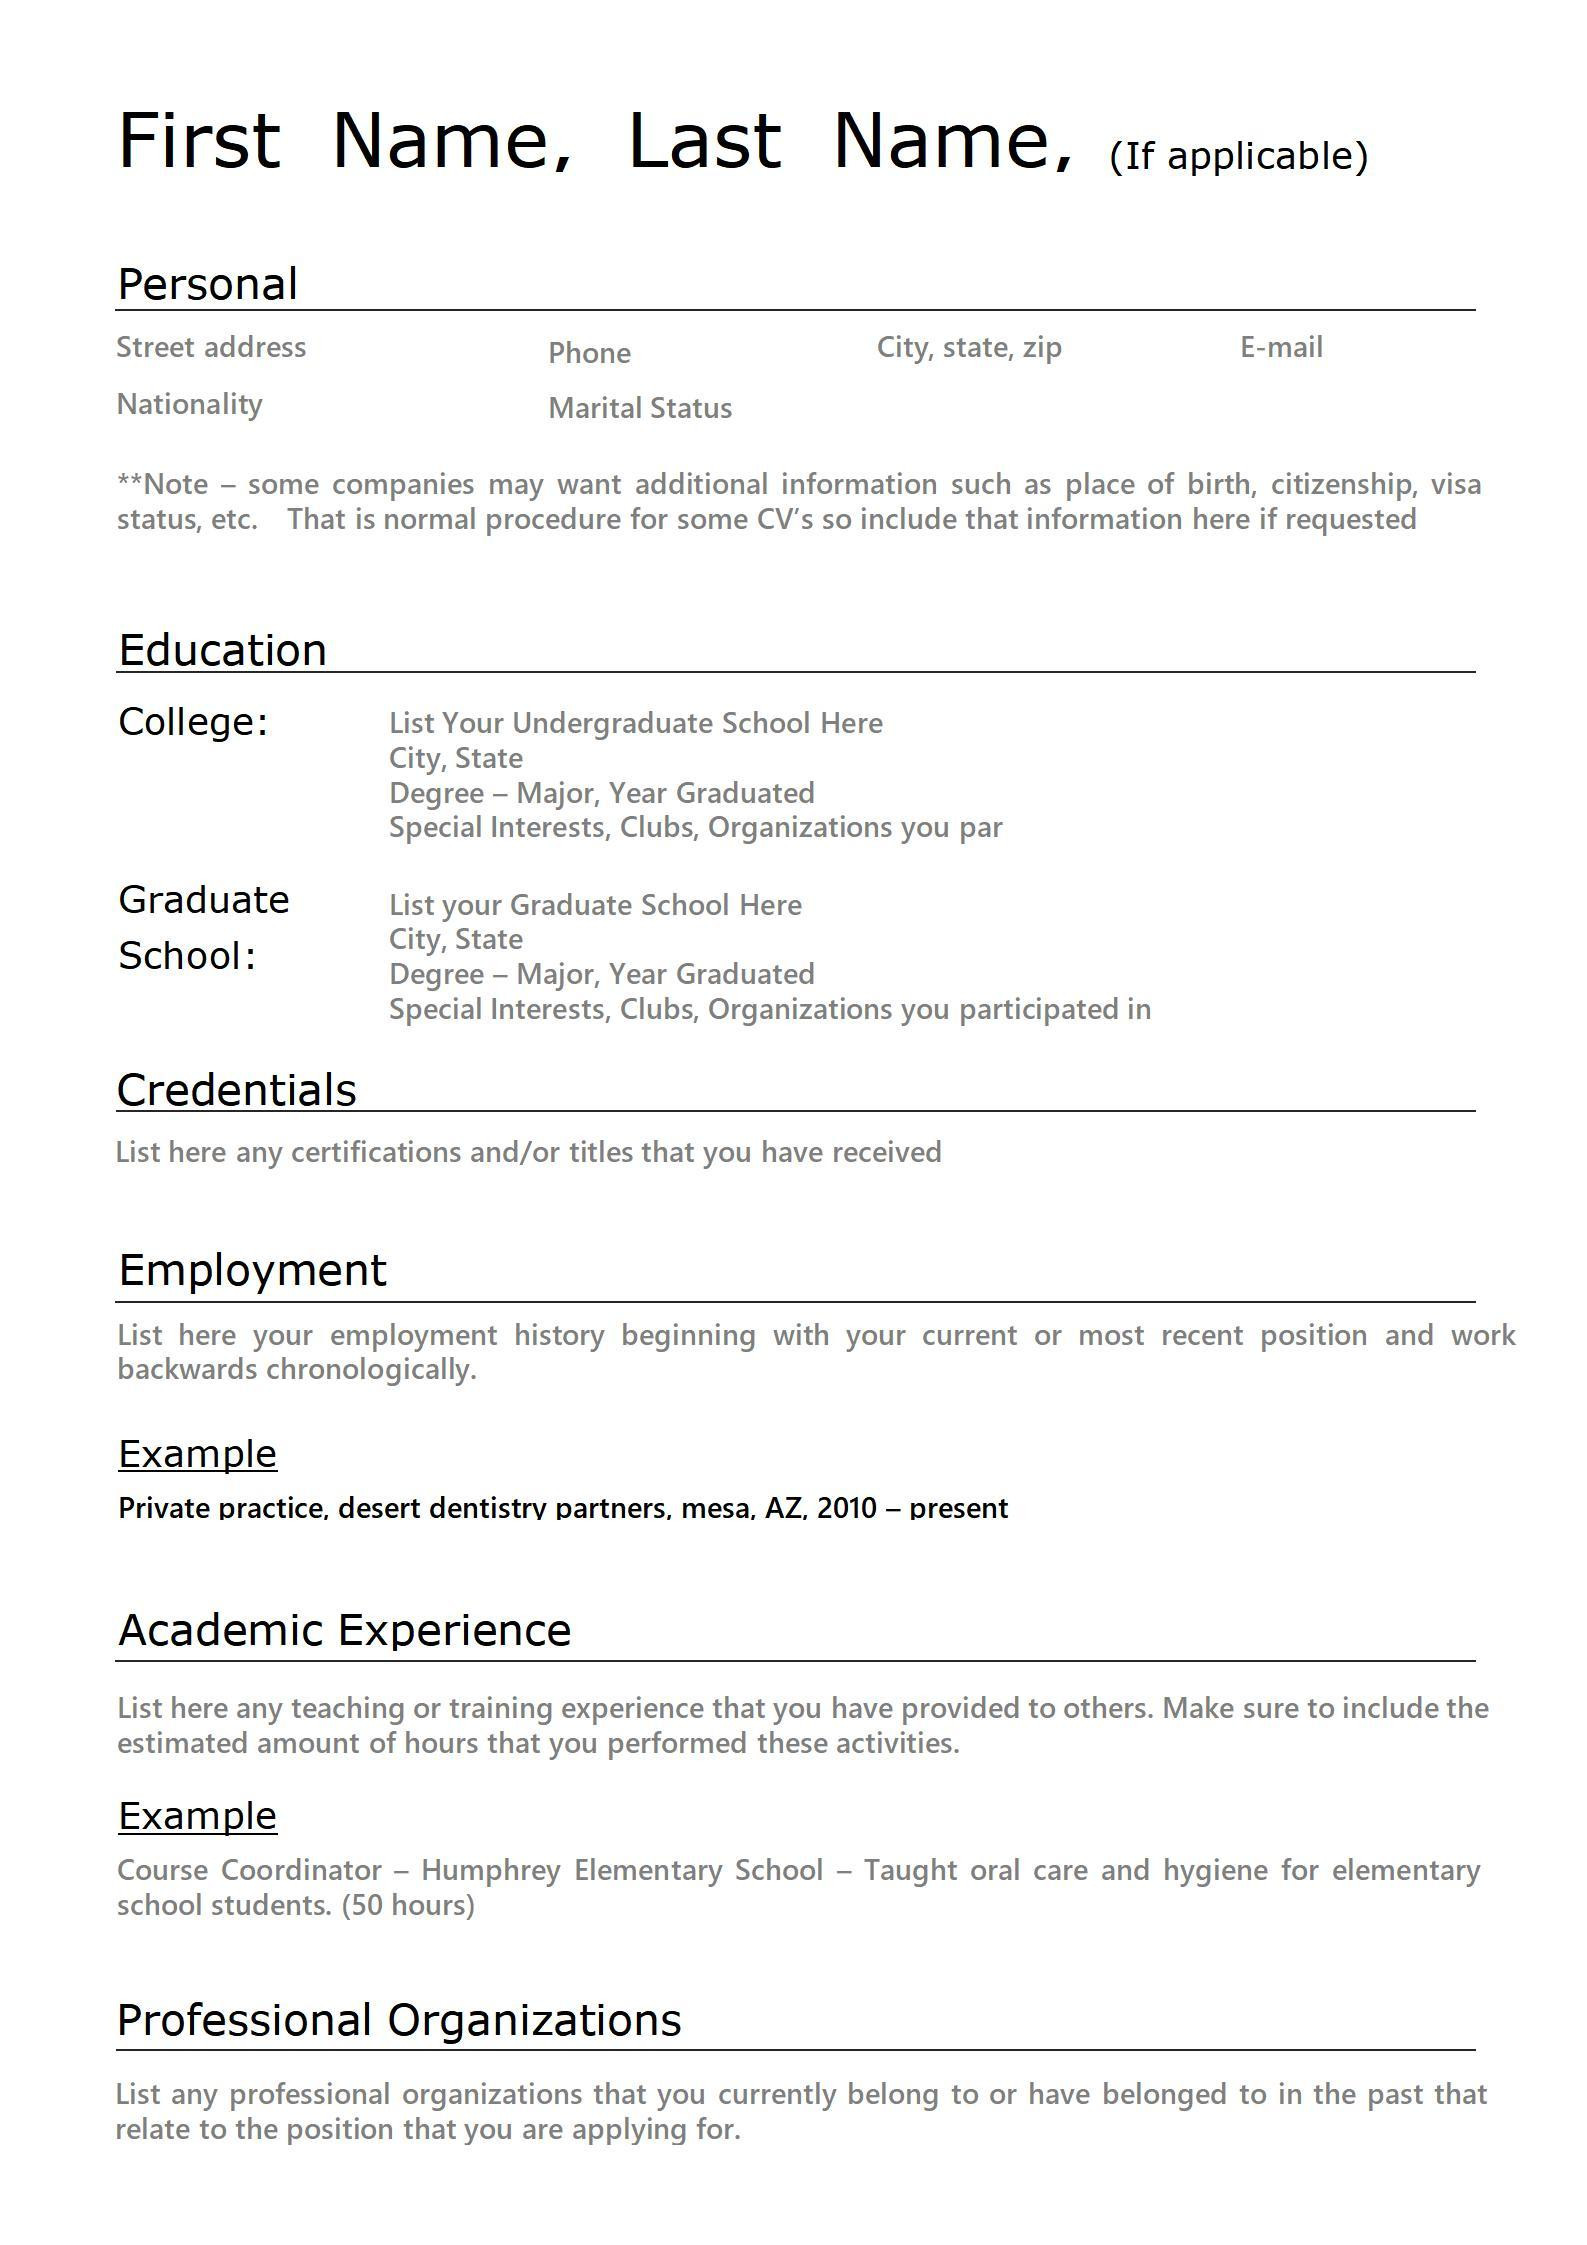 First Time Job Seeker Resume Samples First-time Resume with No Experience Samples Wps Office Academy